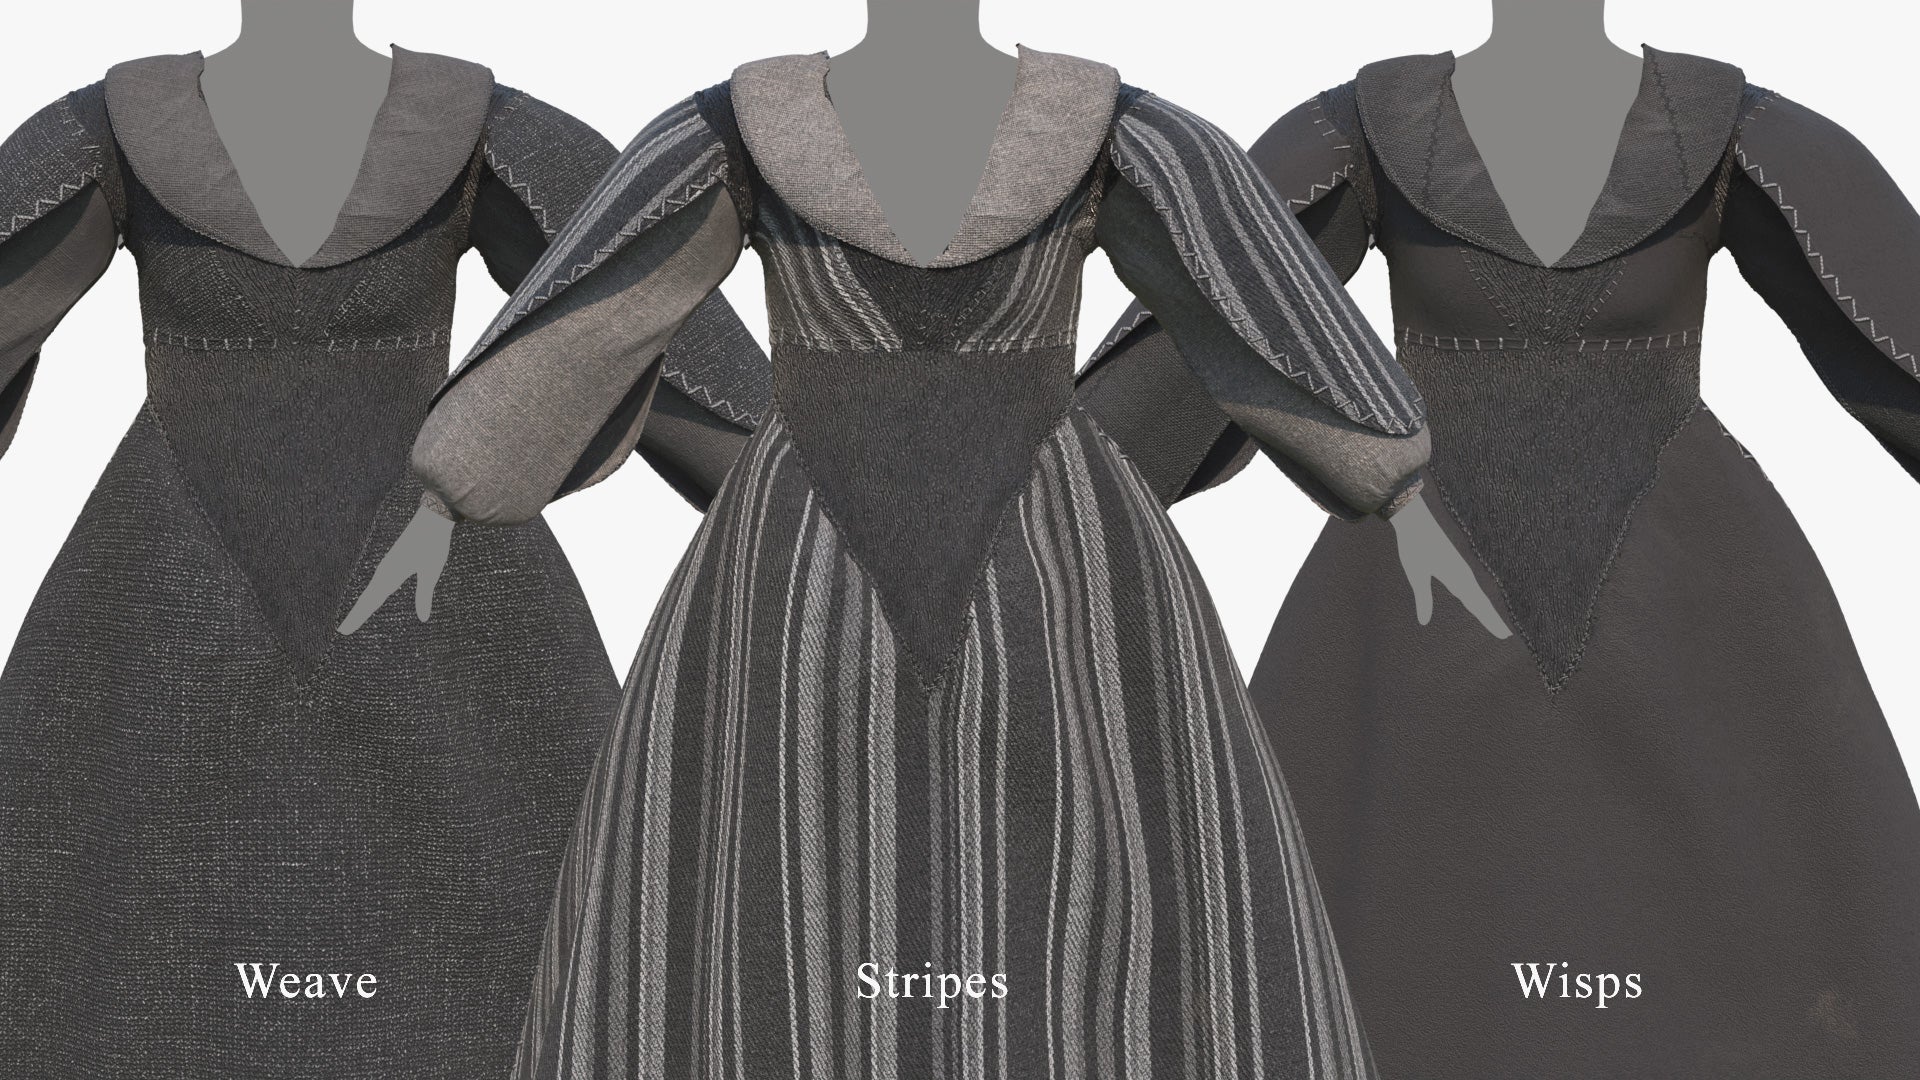 3D model of a medieval-fantasy dress, whale inspired design, rough materials and black colors, with low poly count and PBR textures, for Blender, OBJ, FBX and GBL